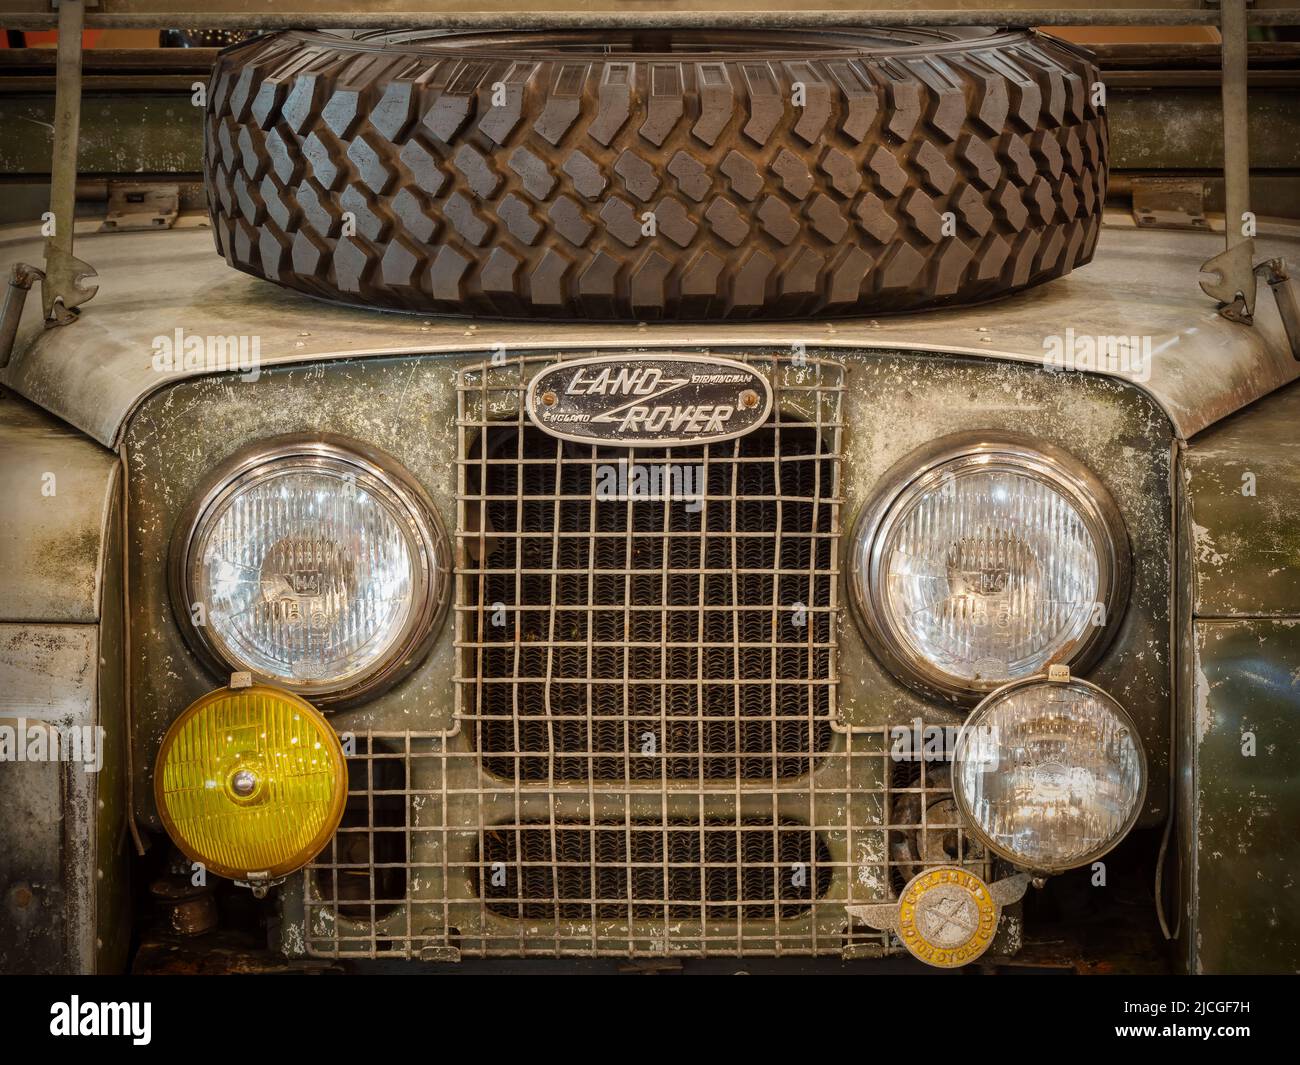 Essen, Germany - March 23, 2022: Front view of a heavily weathered original Land Rover Series 1 classic British car in Essen, Germany Stock Photo